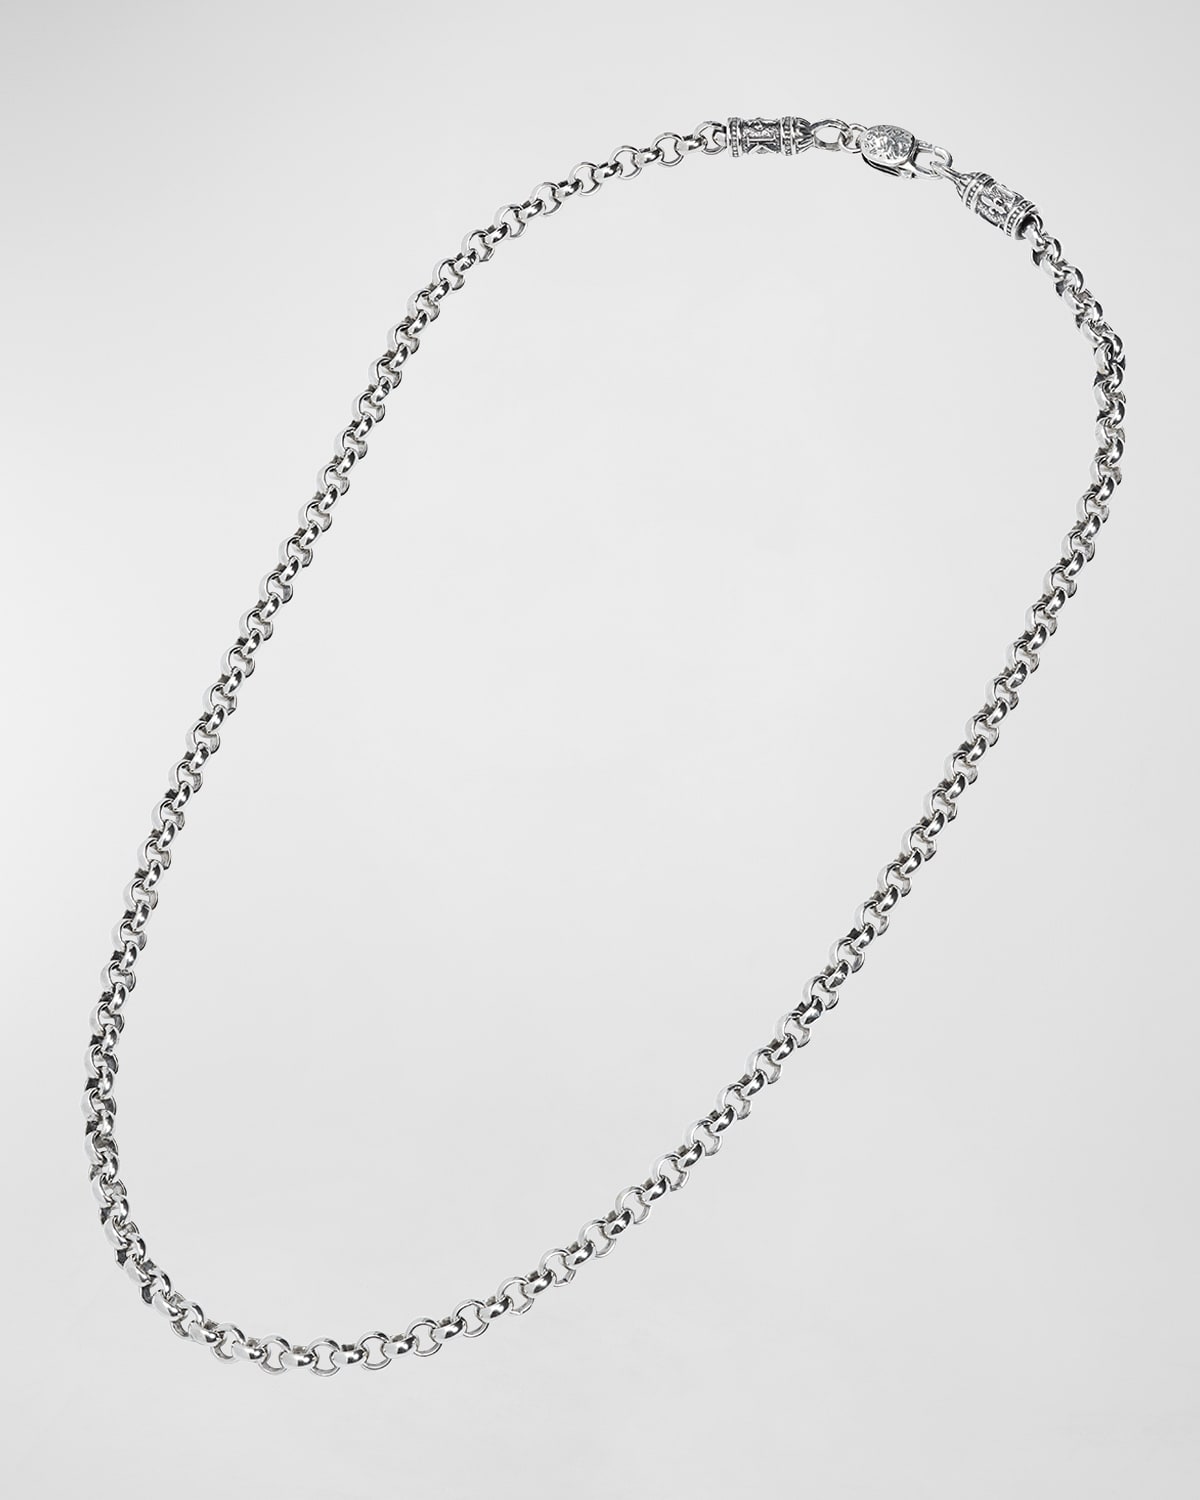 Men's Sterling Silver Cable Chain Necklace, 22"L